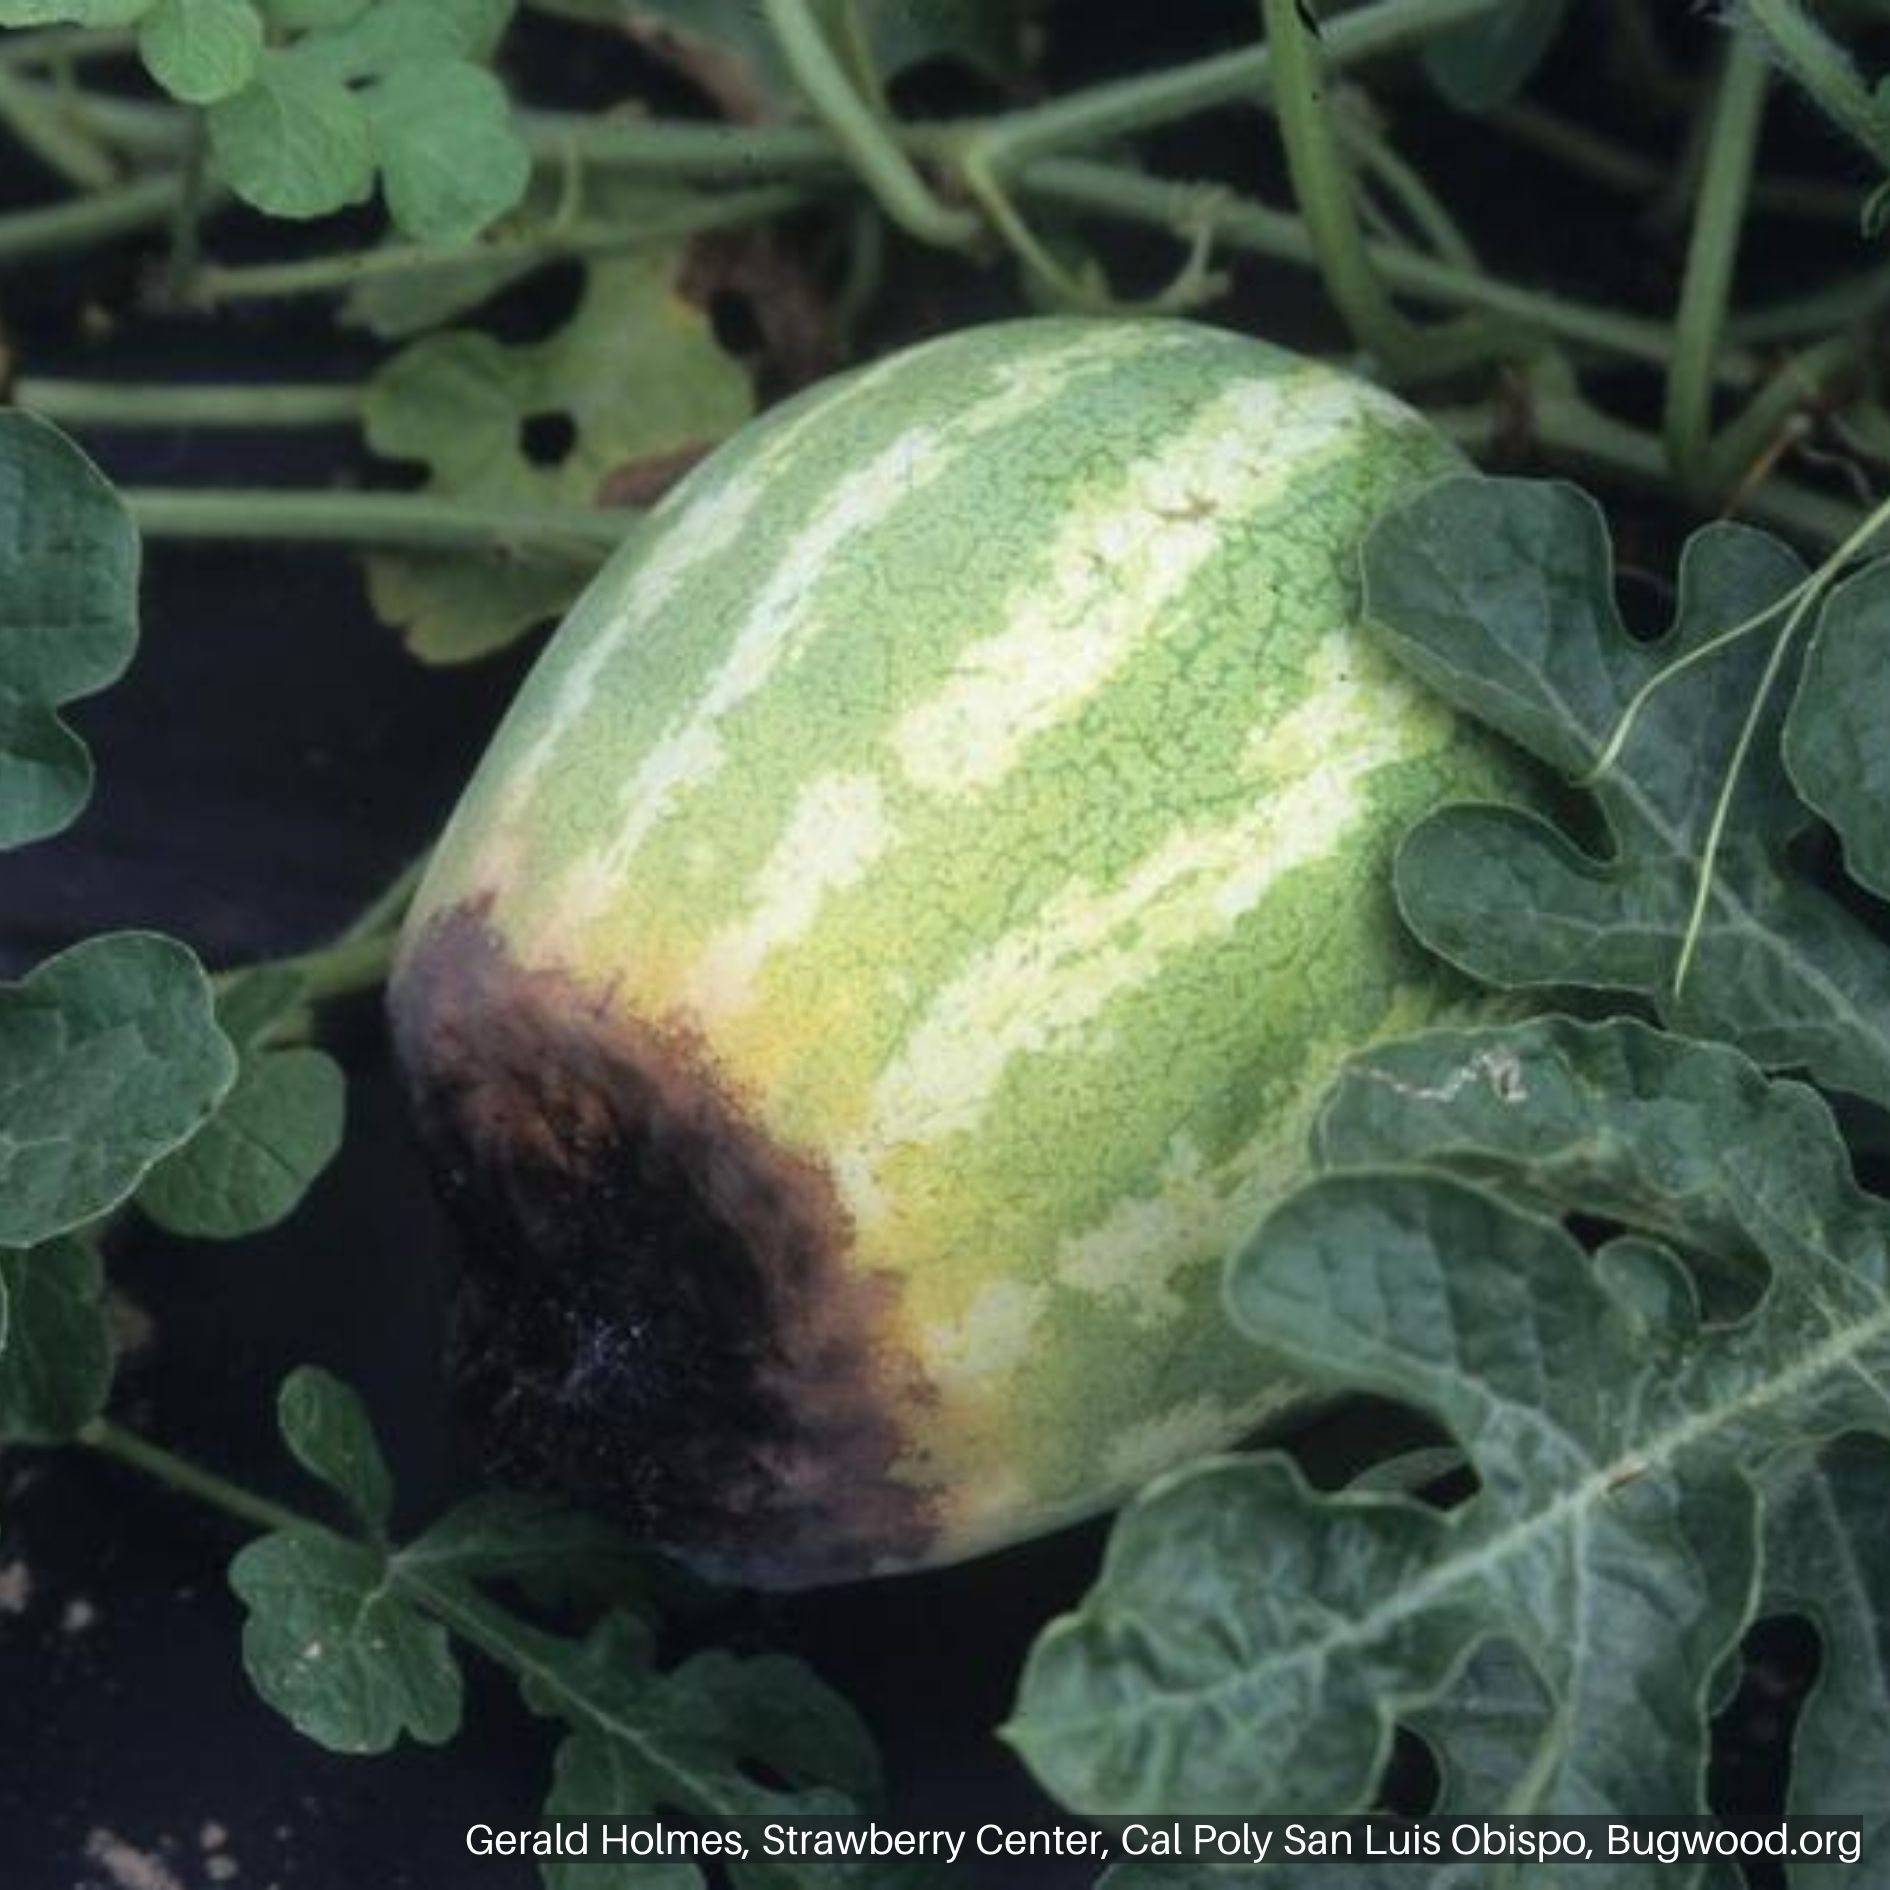 Watermelon with Blossom End Rot (BER)